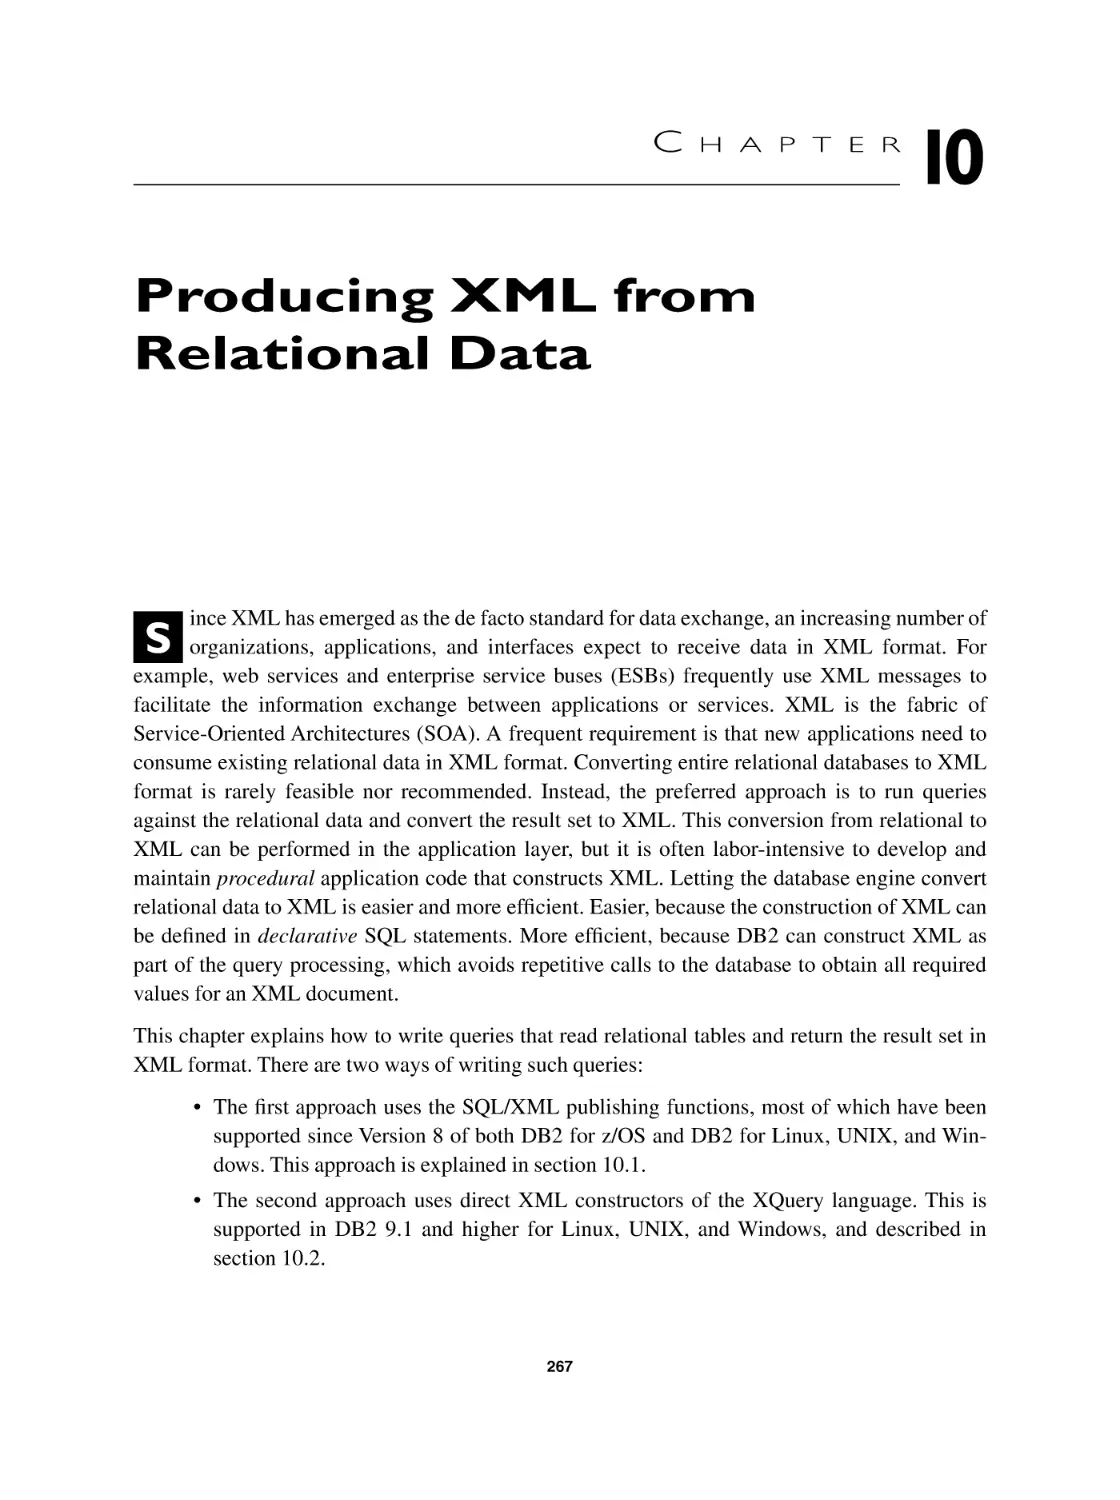 Chapter 10 Producing XML from Relational Data